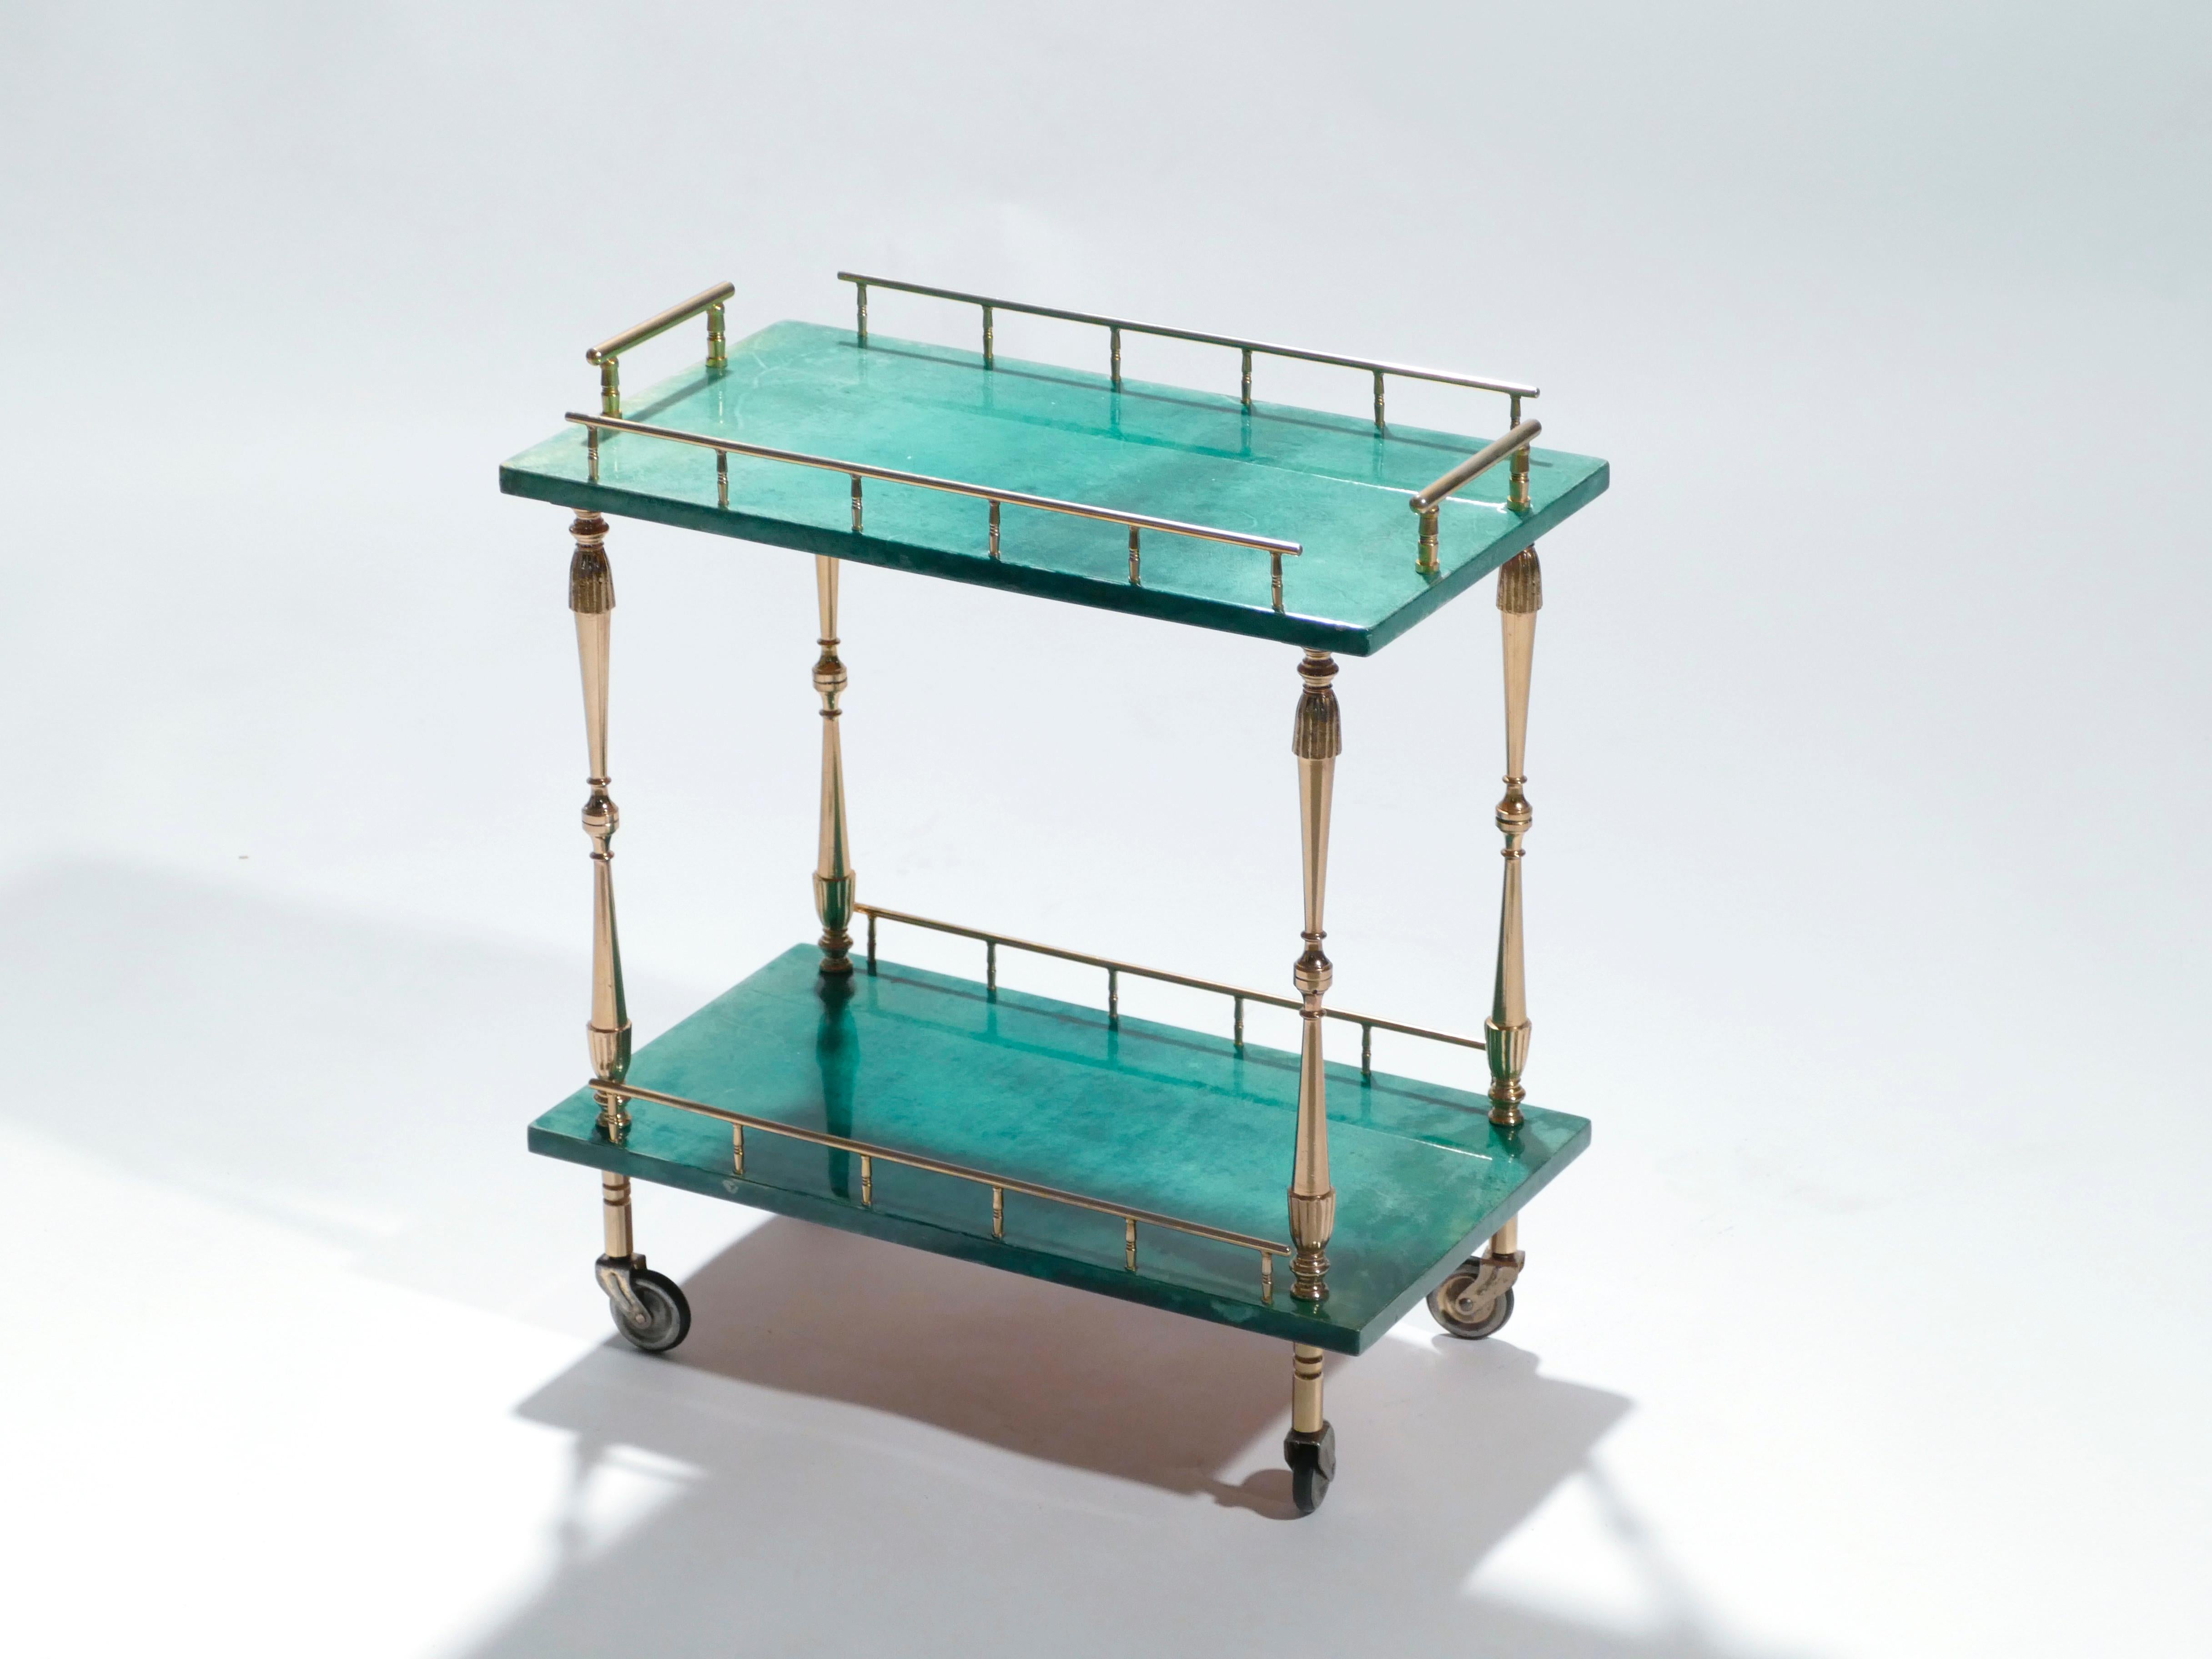 Aldo Tura designs nearly always incorporated goatskin parchment, often colored as seen here, in a deep emerald green. This small and highly decorative bar cart, then, seems to be the epitome of a Tura design. The varnished goatskin parchment